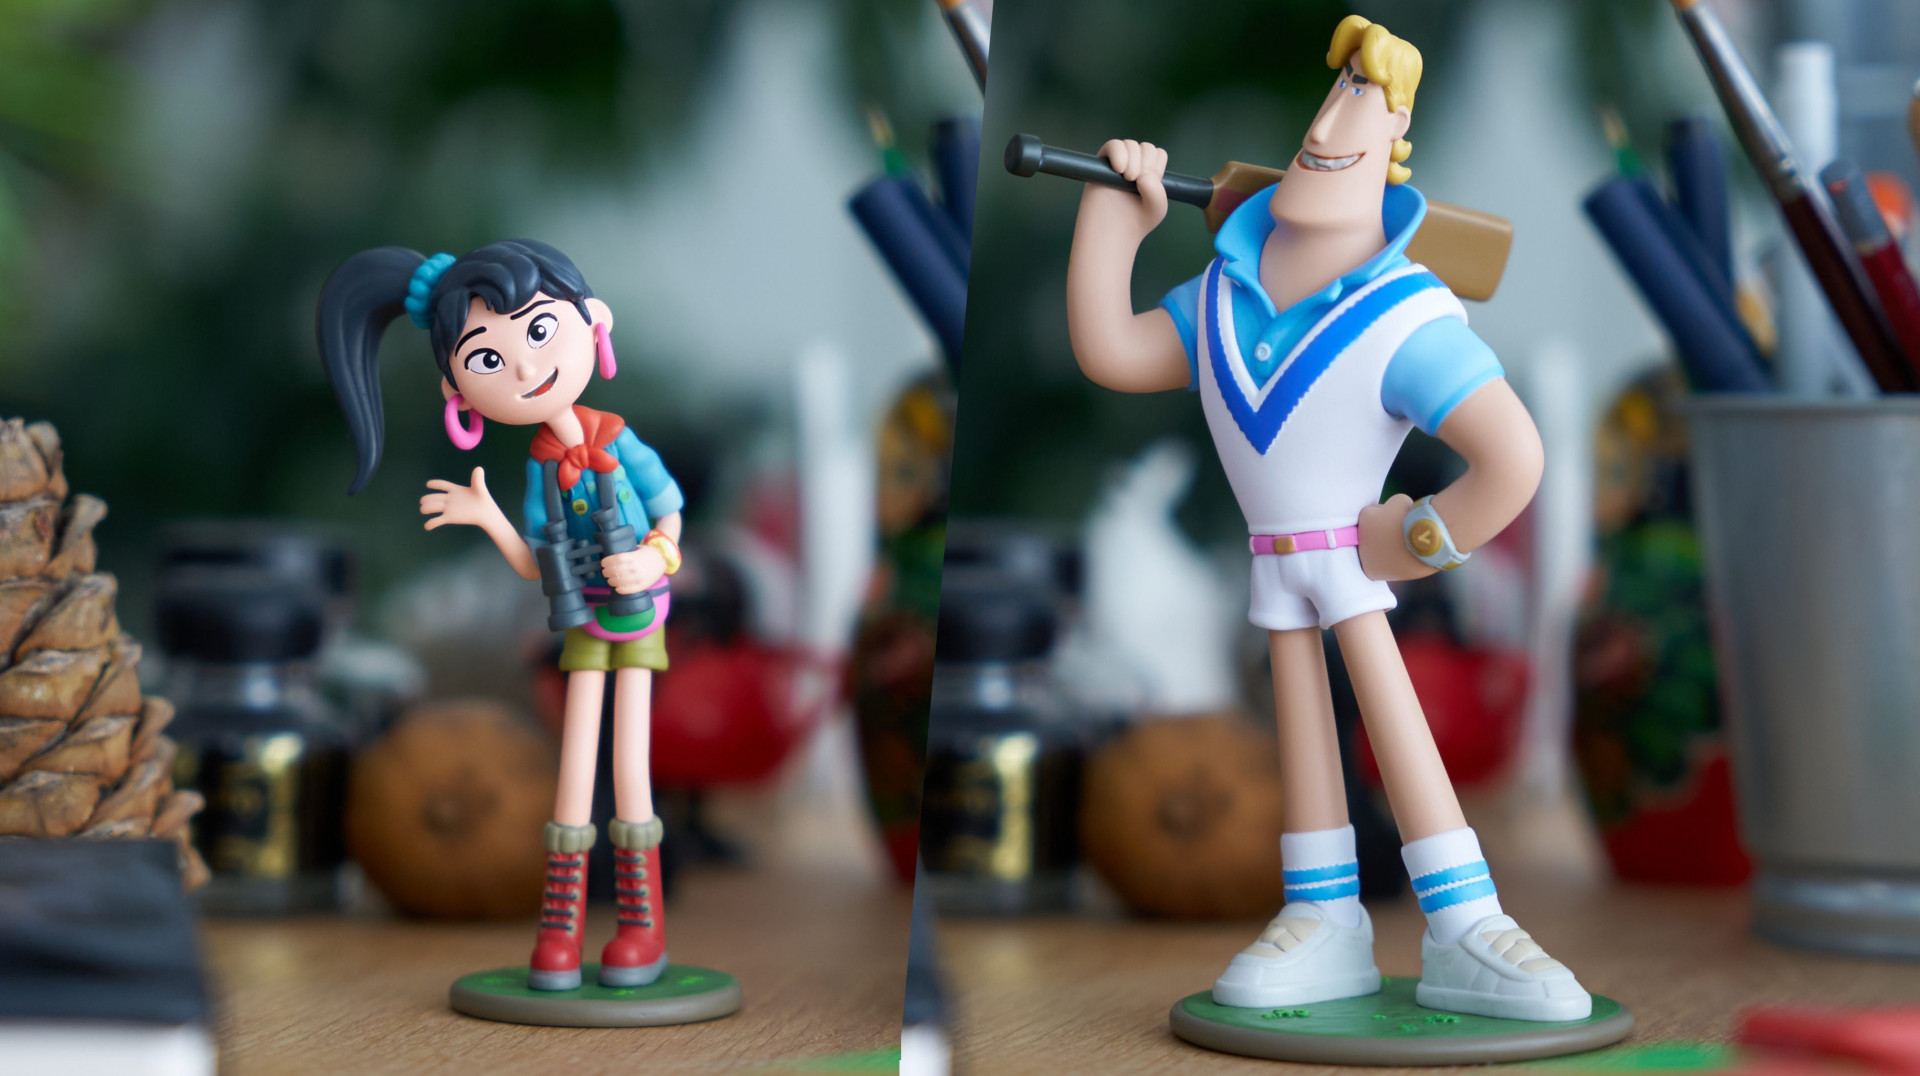 Blender Collectible Figurines